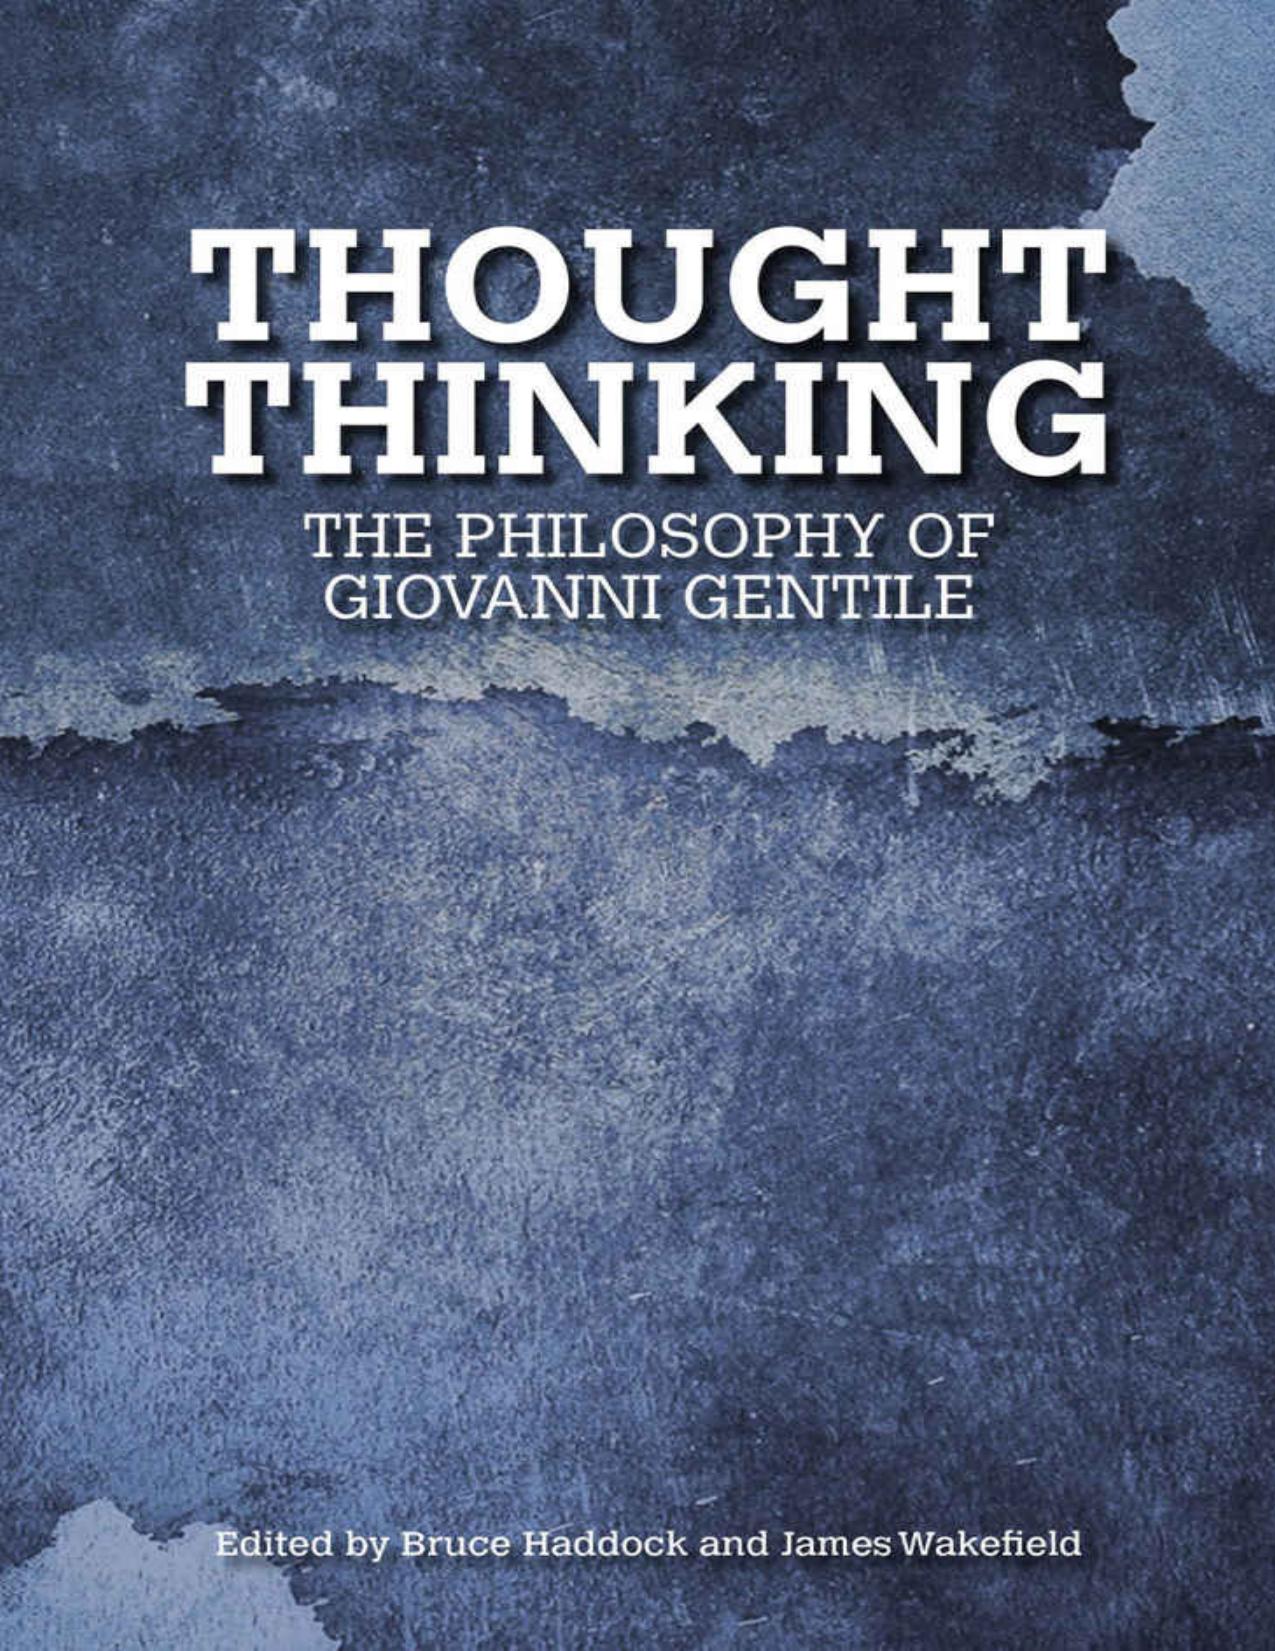 Thought Thinking: The Philosophy of Giovanni Gentile